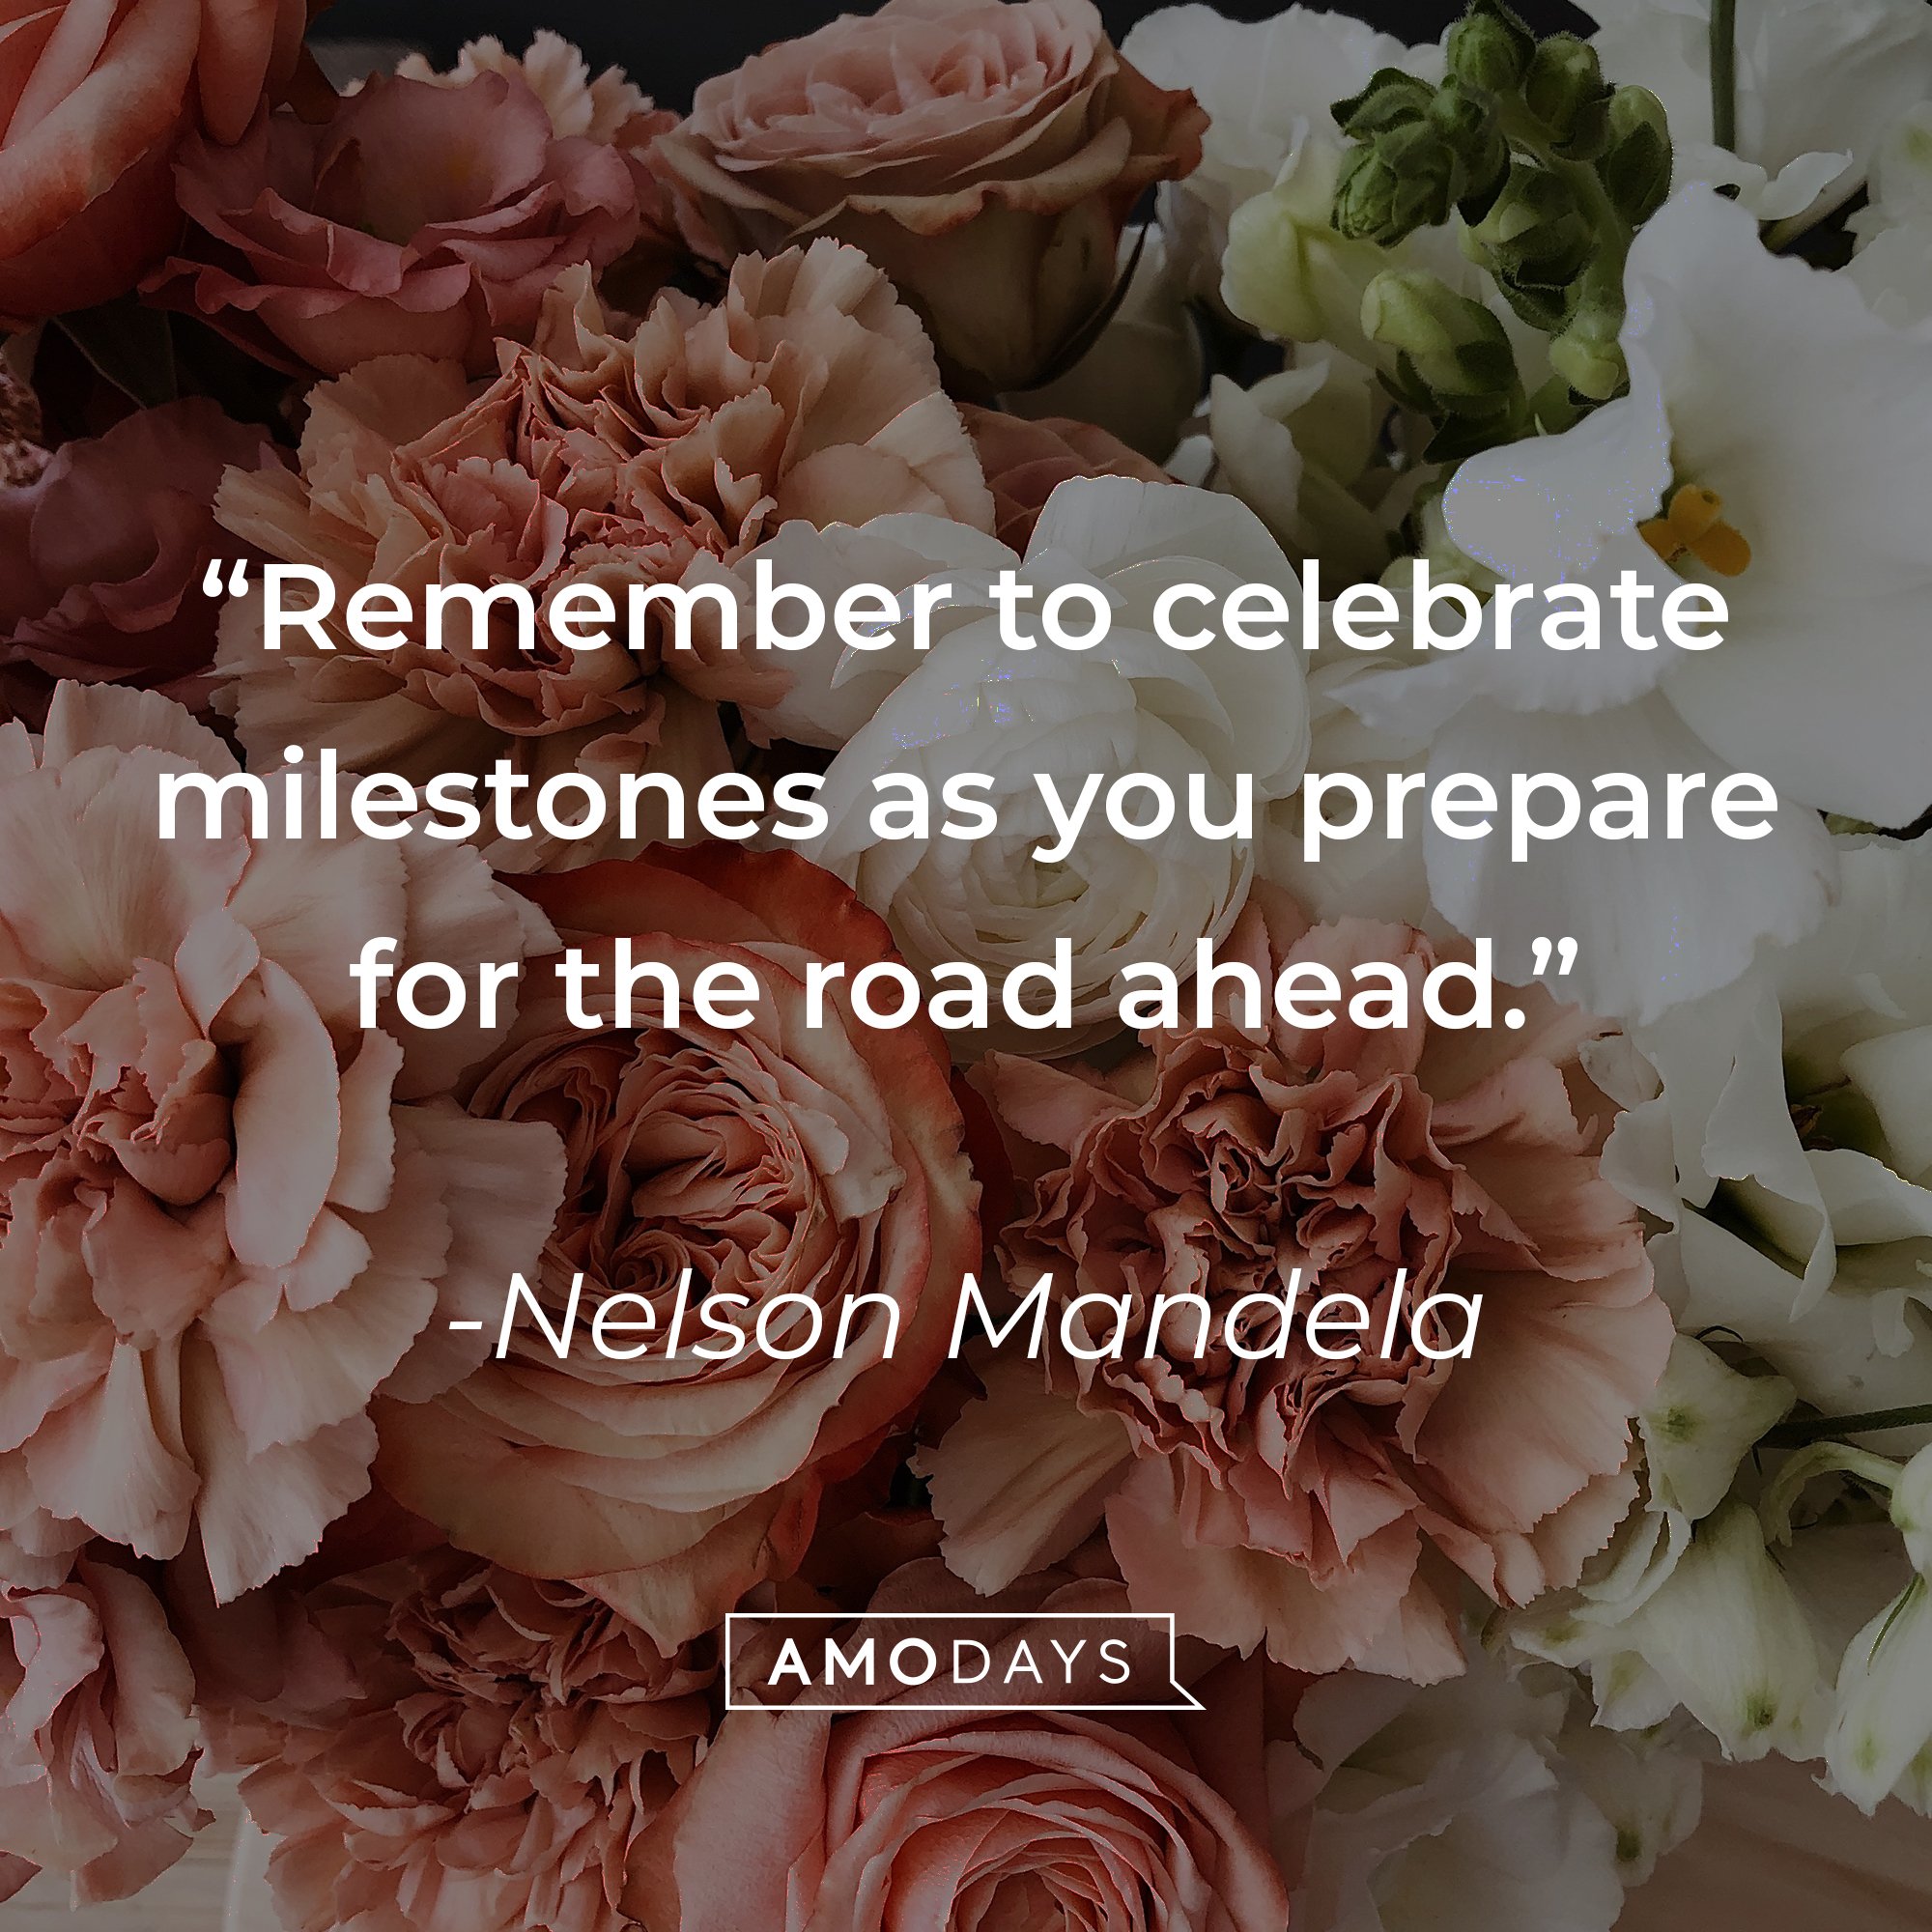  Nelson Mandela's quote: “Remember to celebrate milestones as you prepare for the road ahead.”  | Image: AmoDays